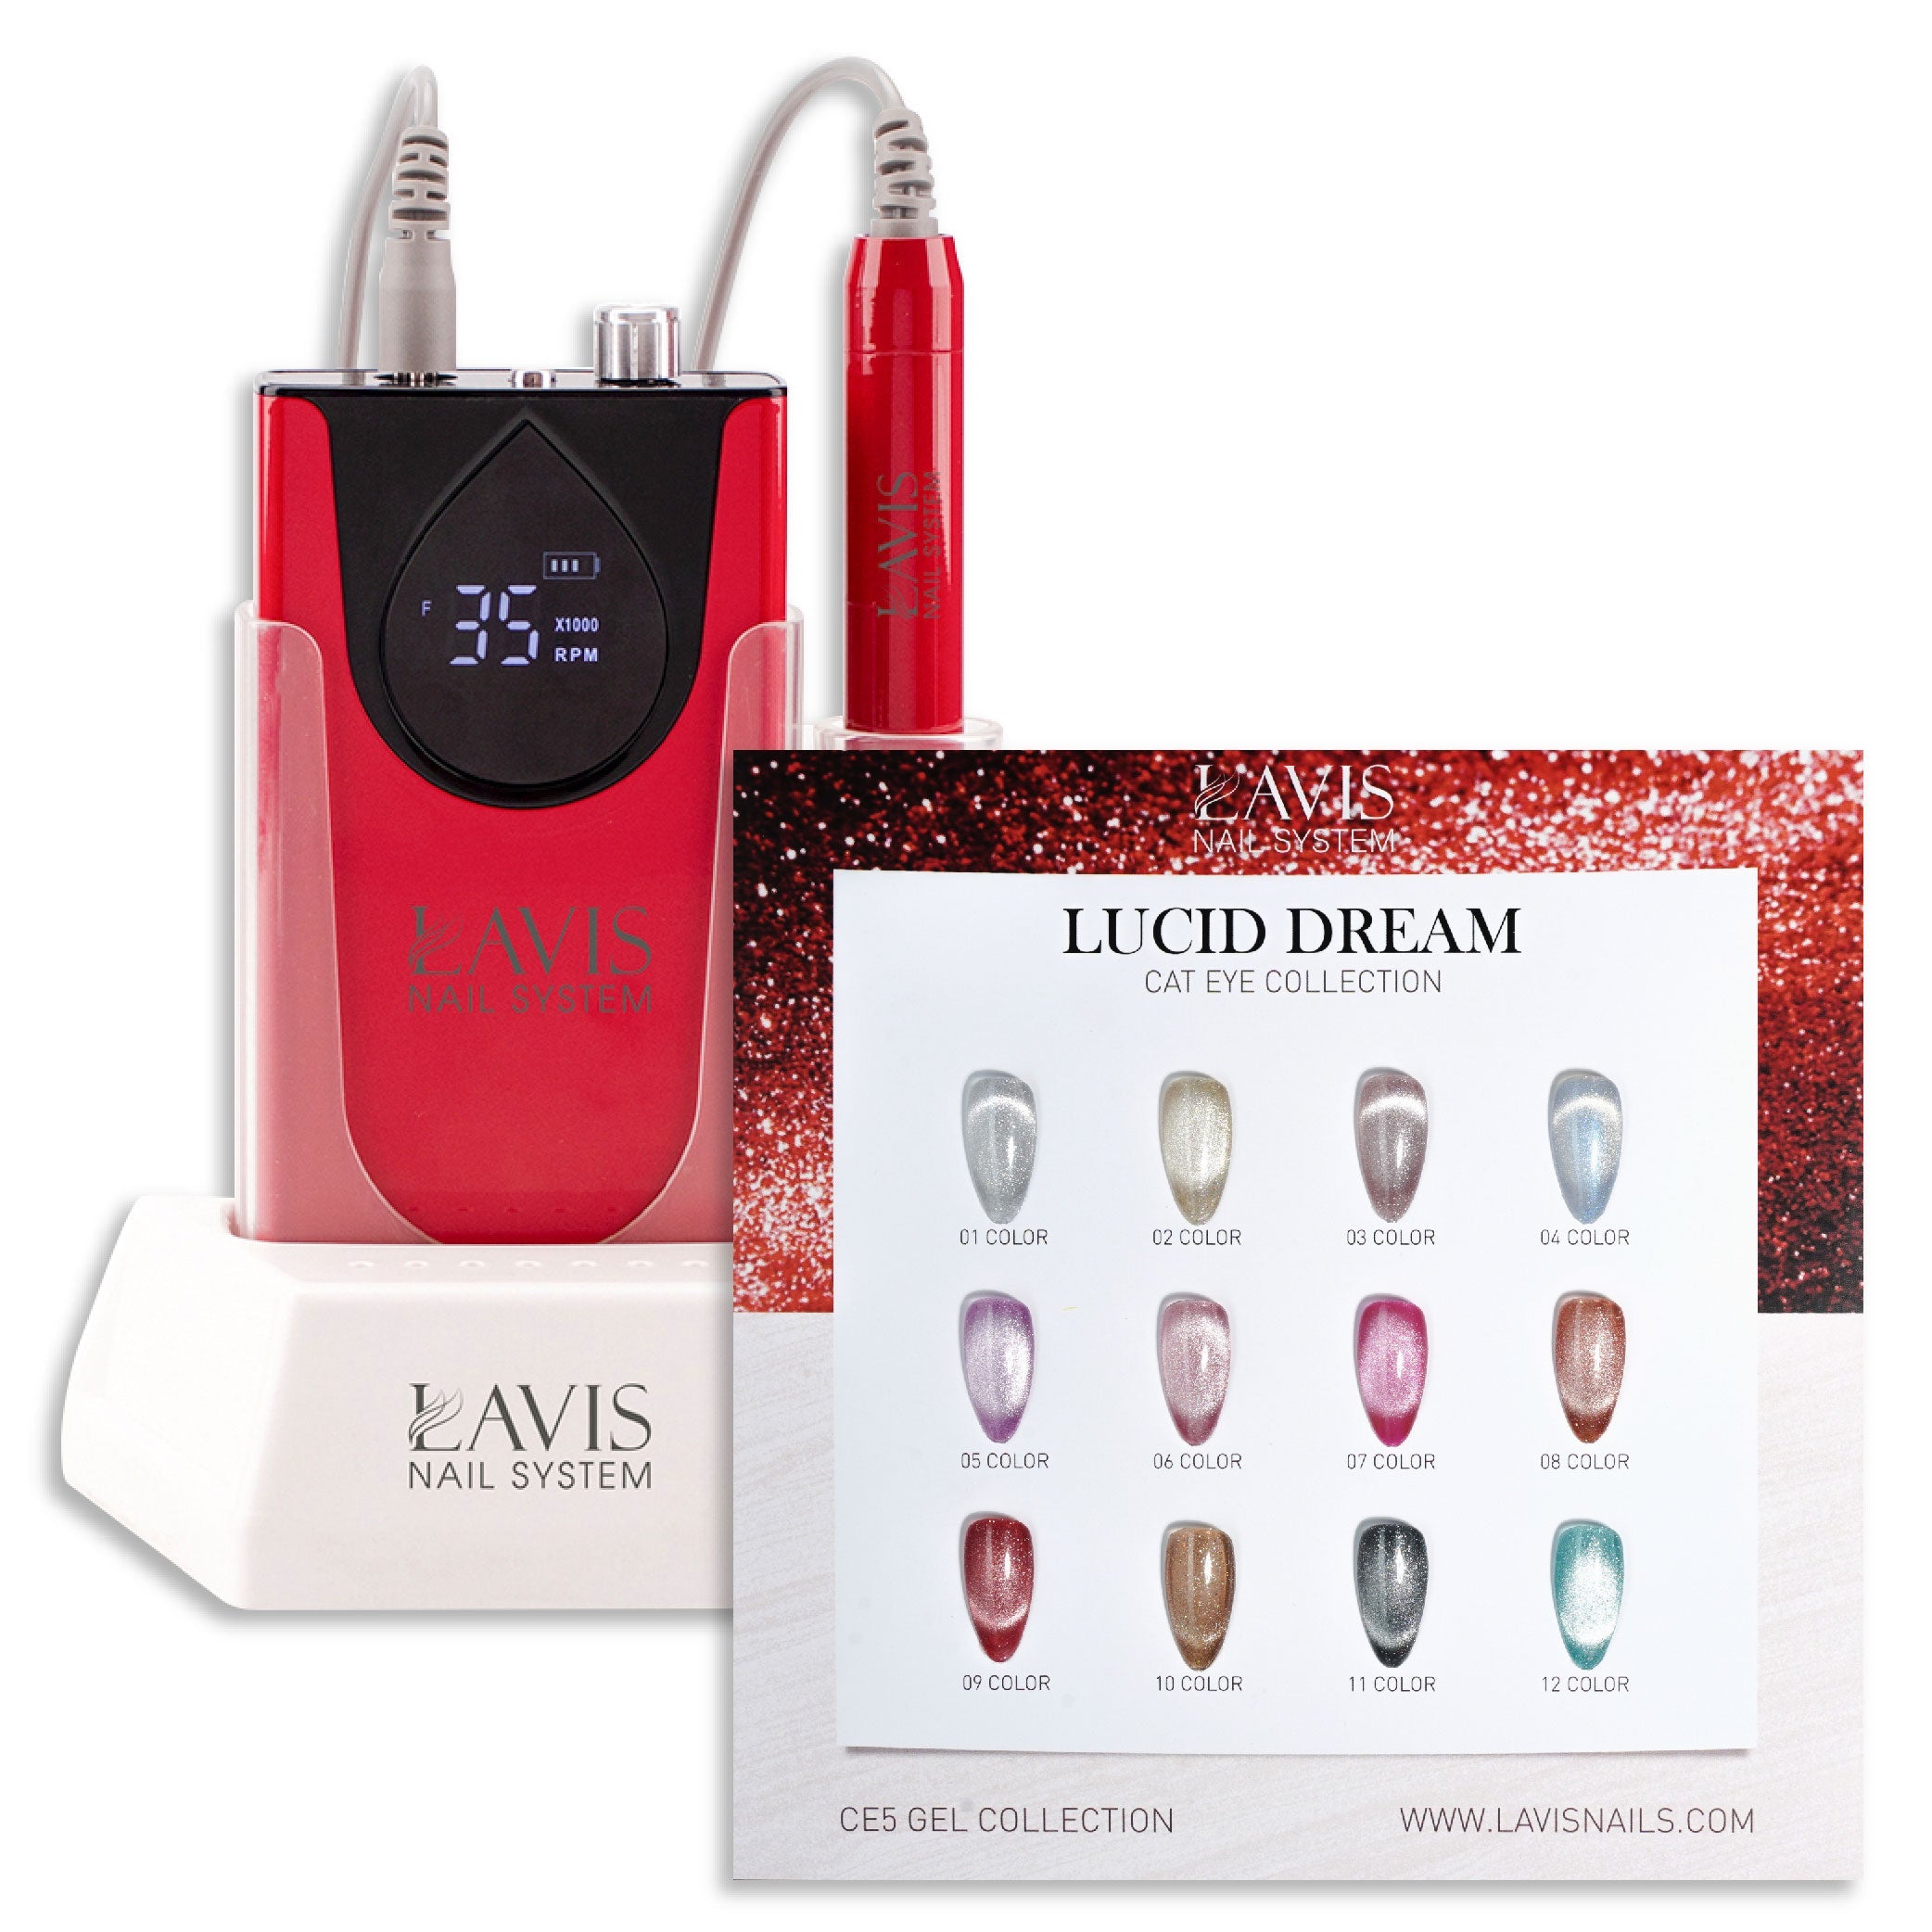 1 Lavis Nail Drill Red & 1 Set Lucid Dream Cat Eye Collection (12 colors)